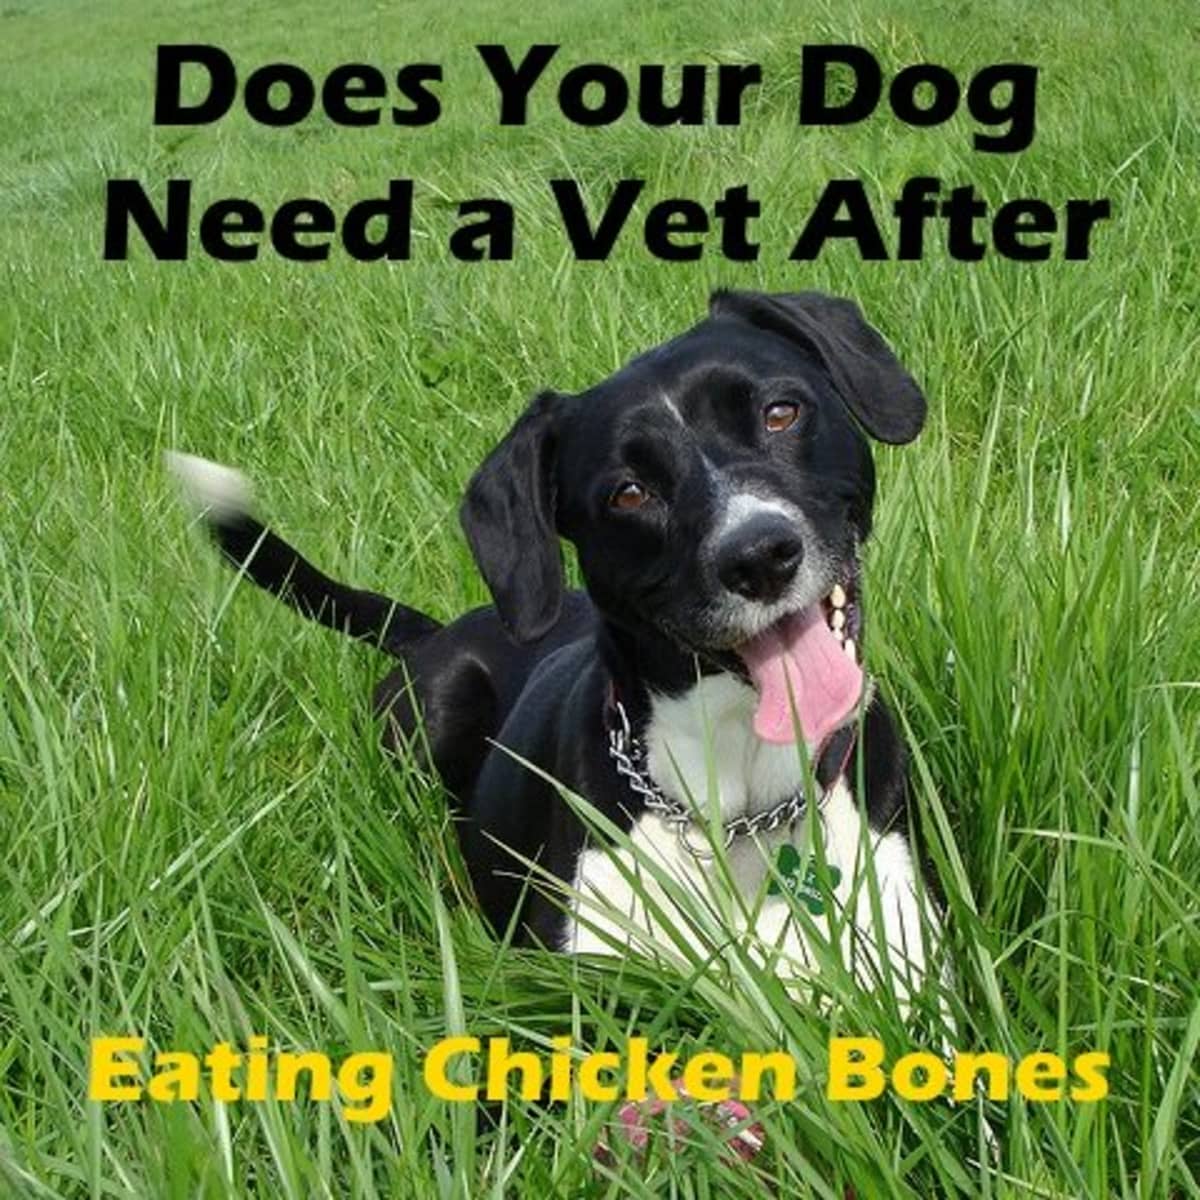 are chicken wing bones good for dogs